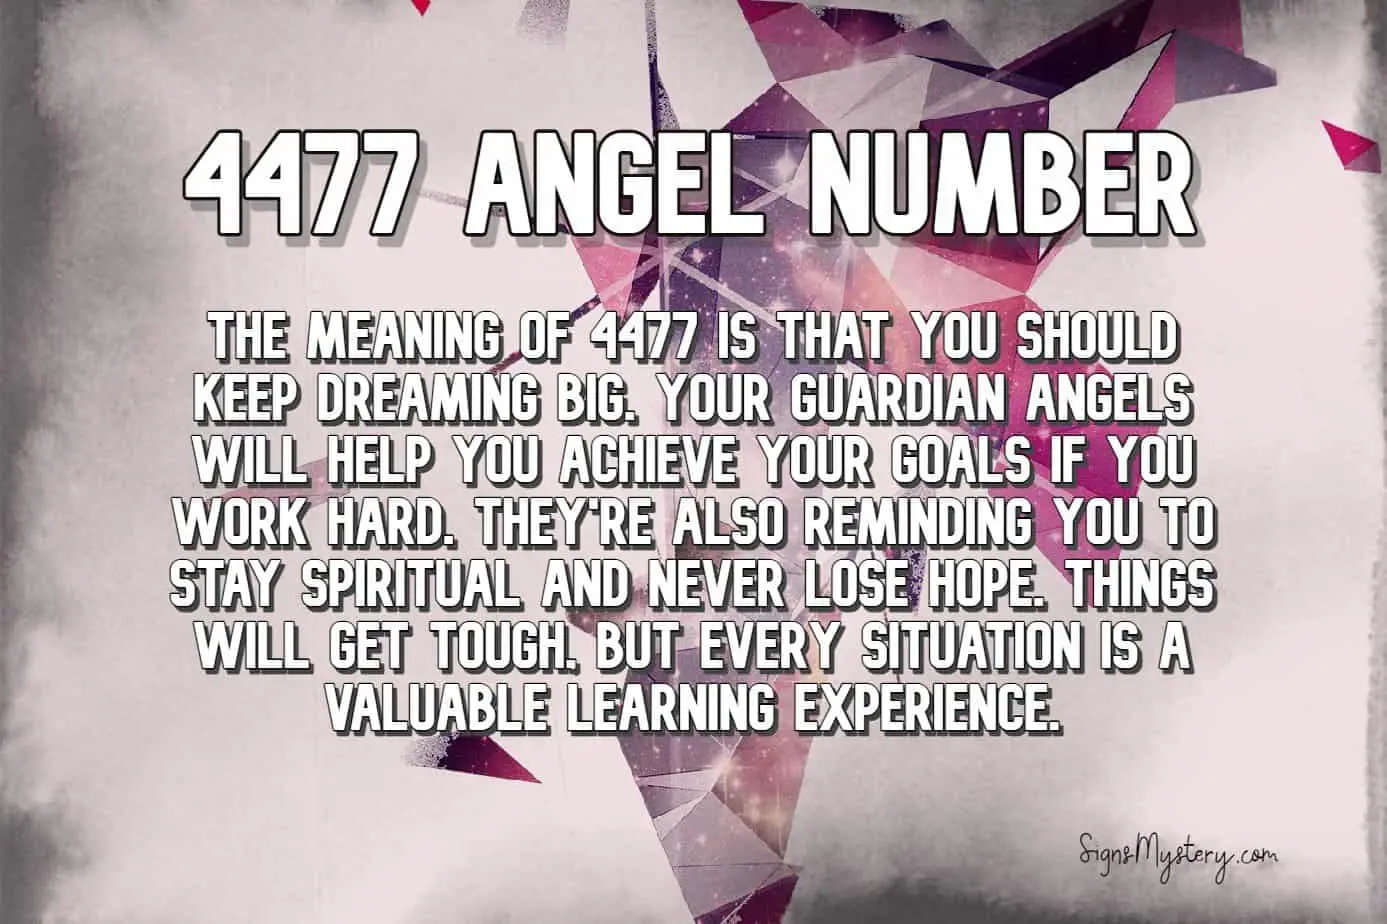 4477 angel number meaning